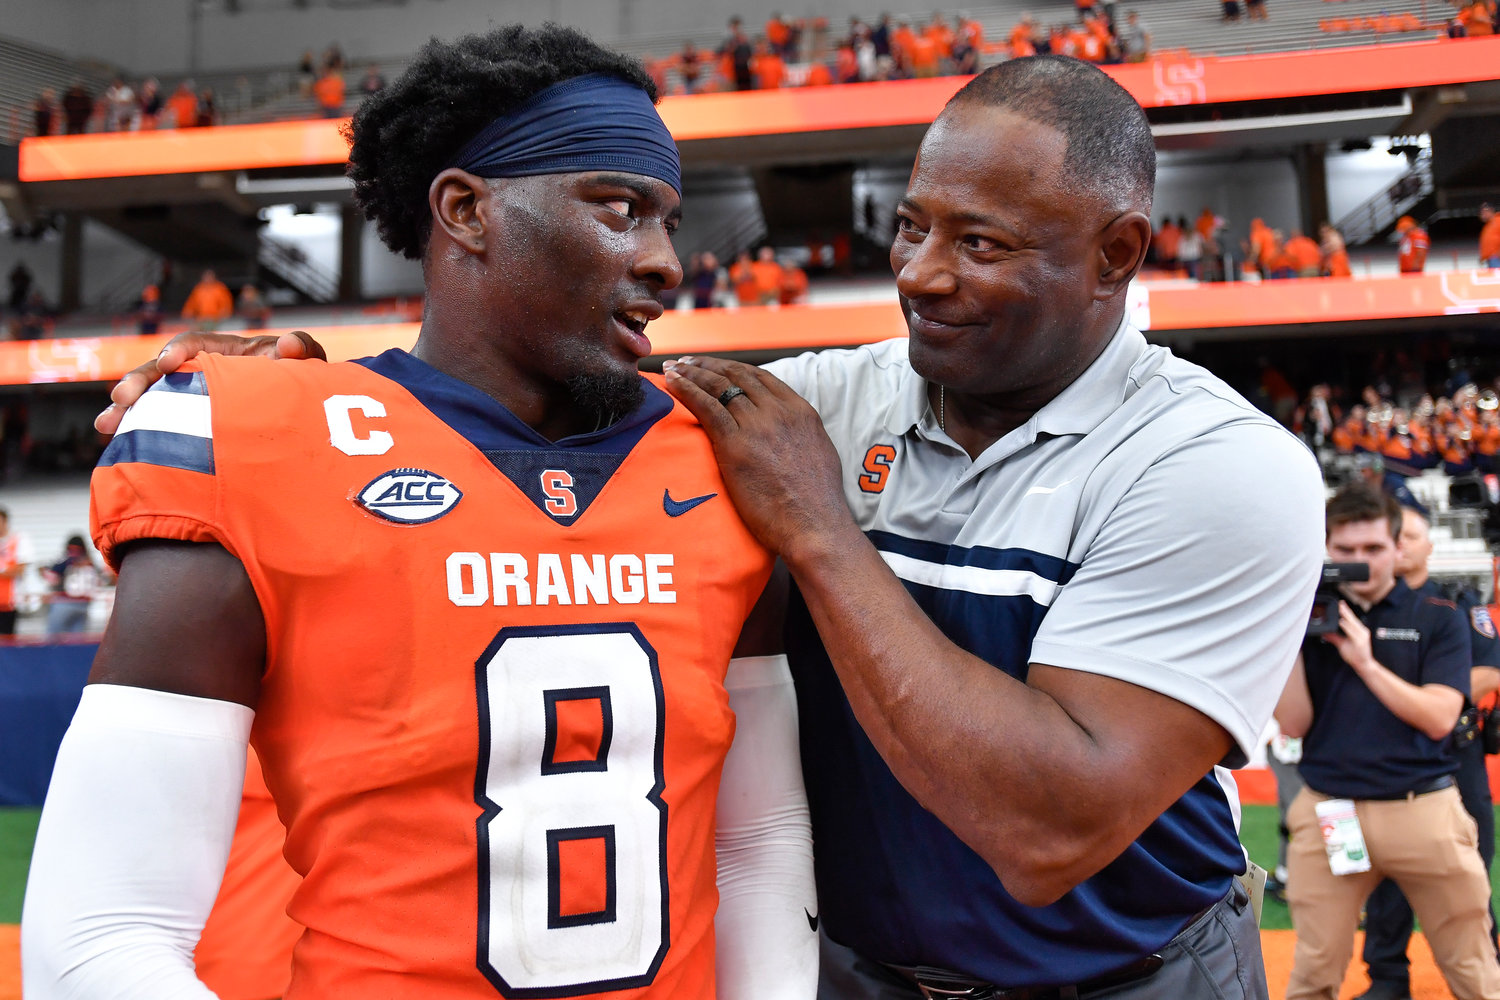 Syracuse head coach Dino Babers, right, celebrates with defensive back Garrett Williams after defeating Purdue on Sept. 17 in Syracuse.